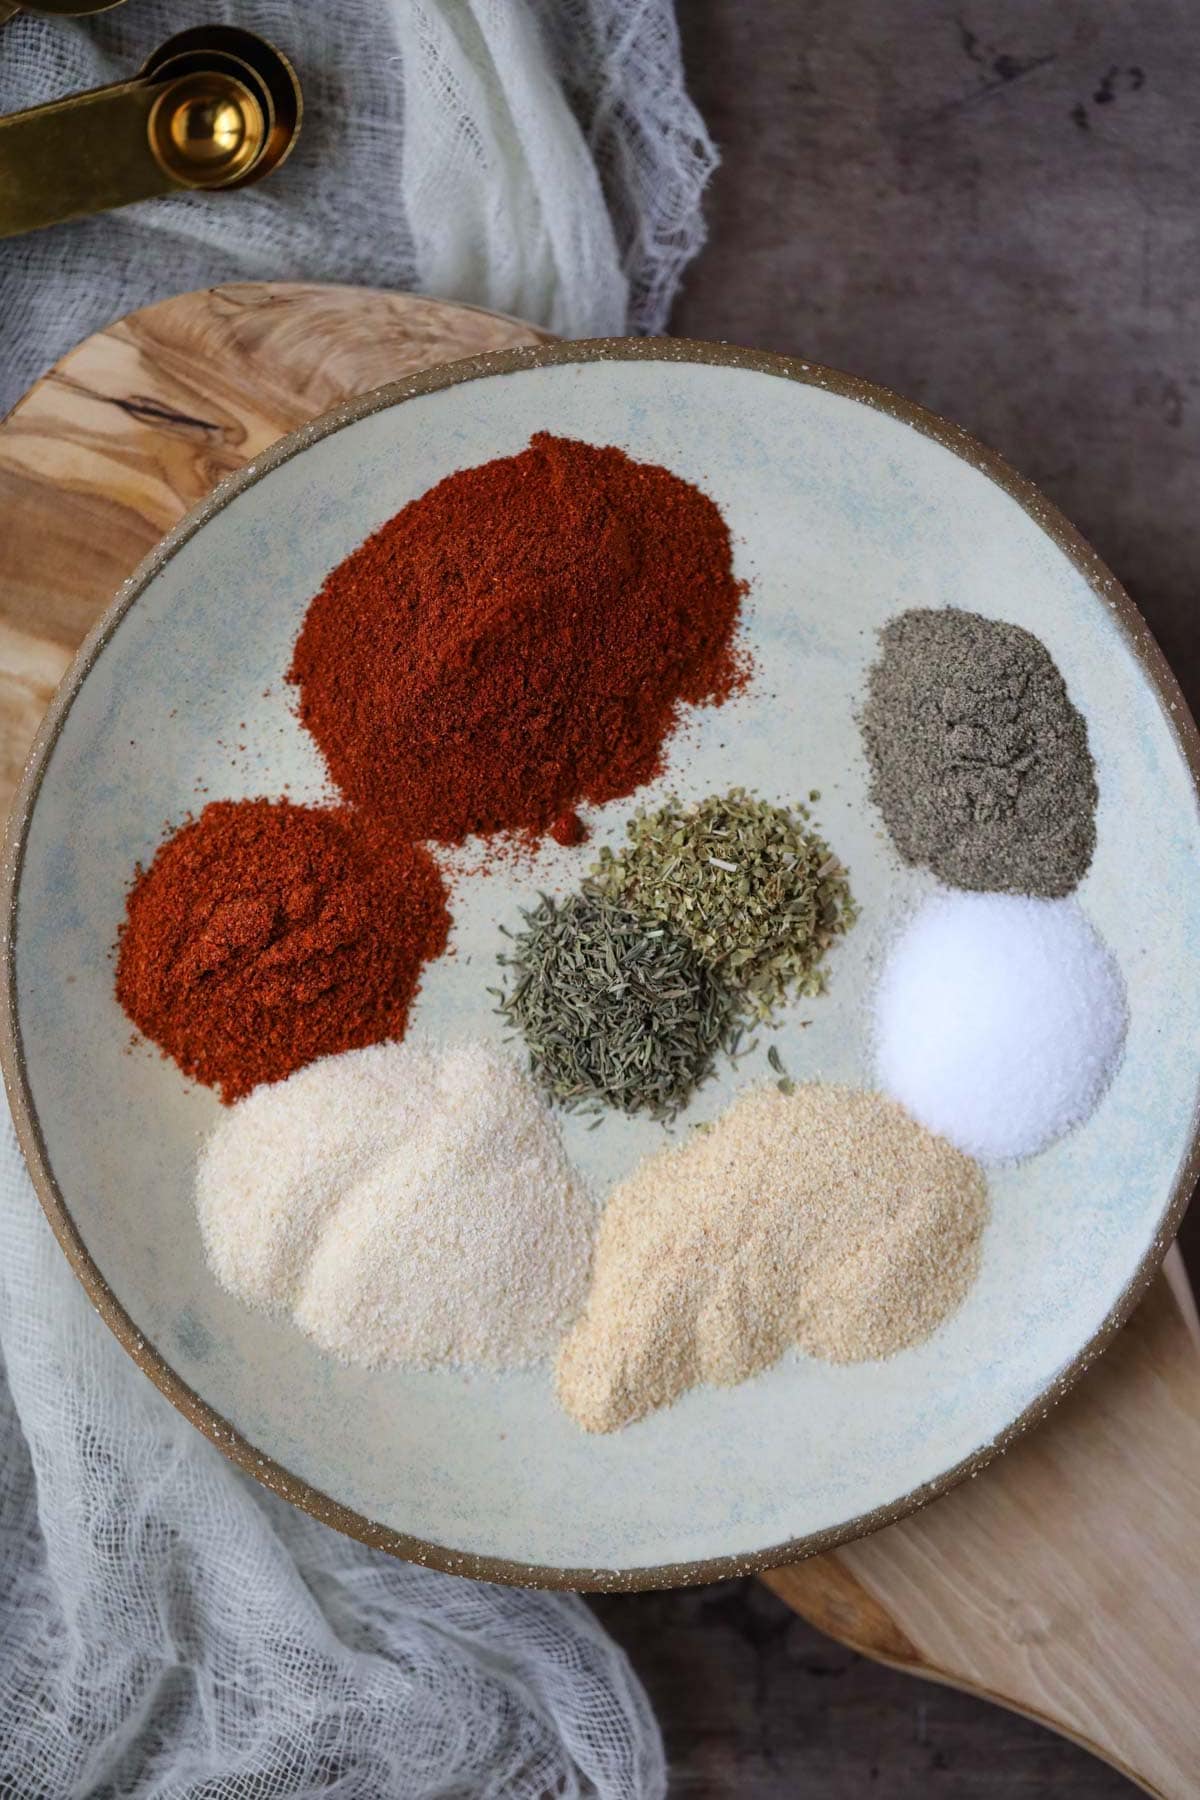 cajun seasoning ingredients on a gray plate on a wooden cutting board.